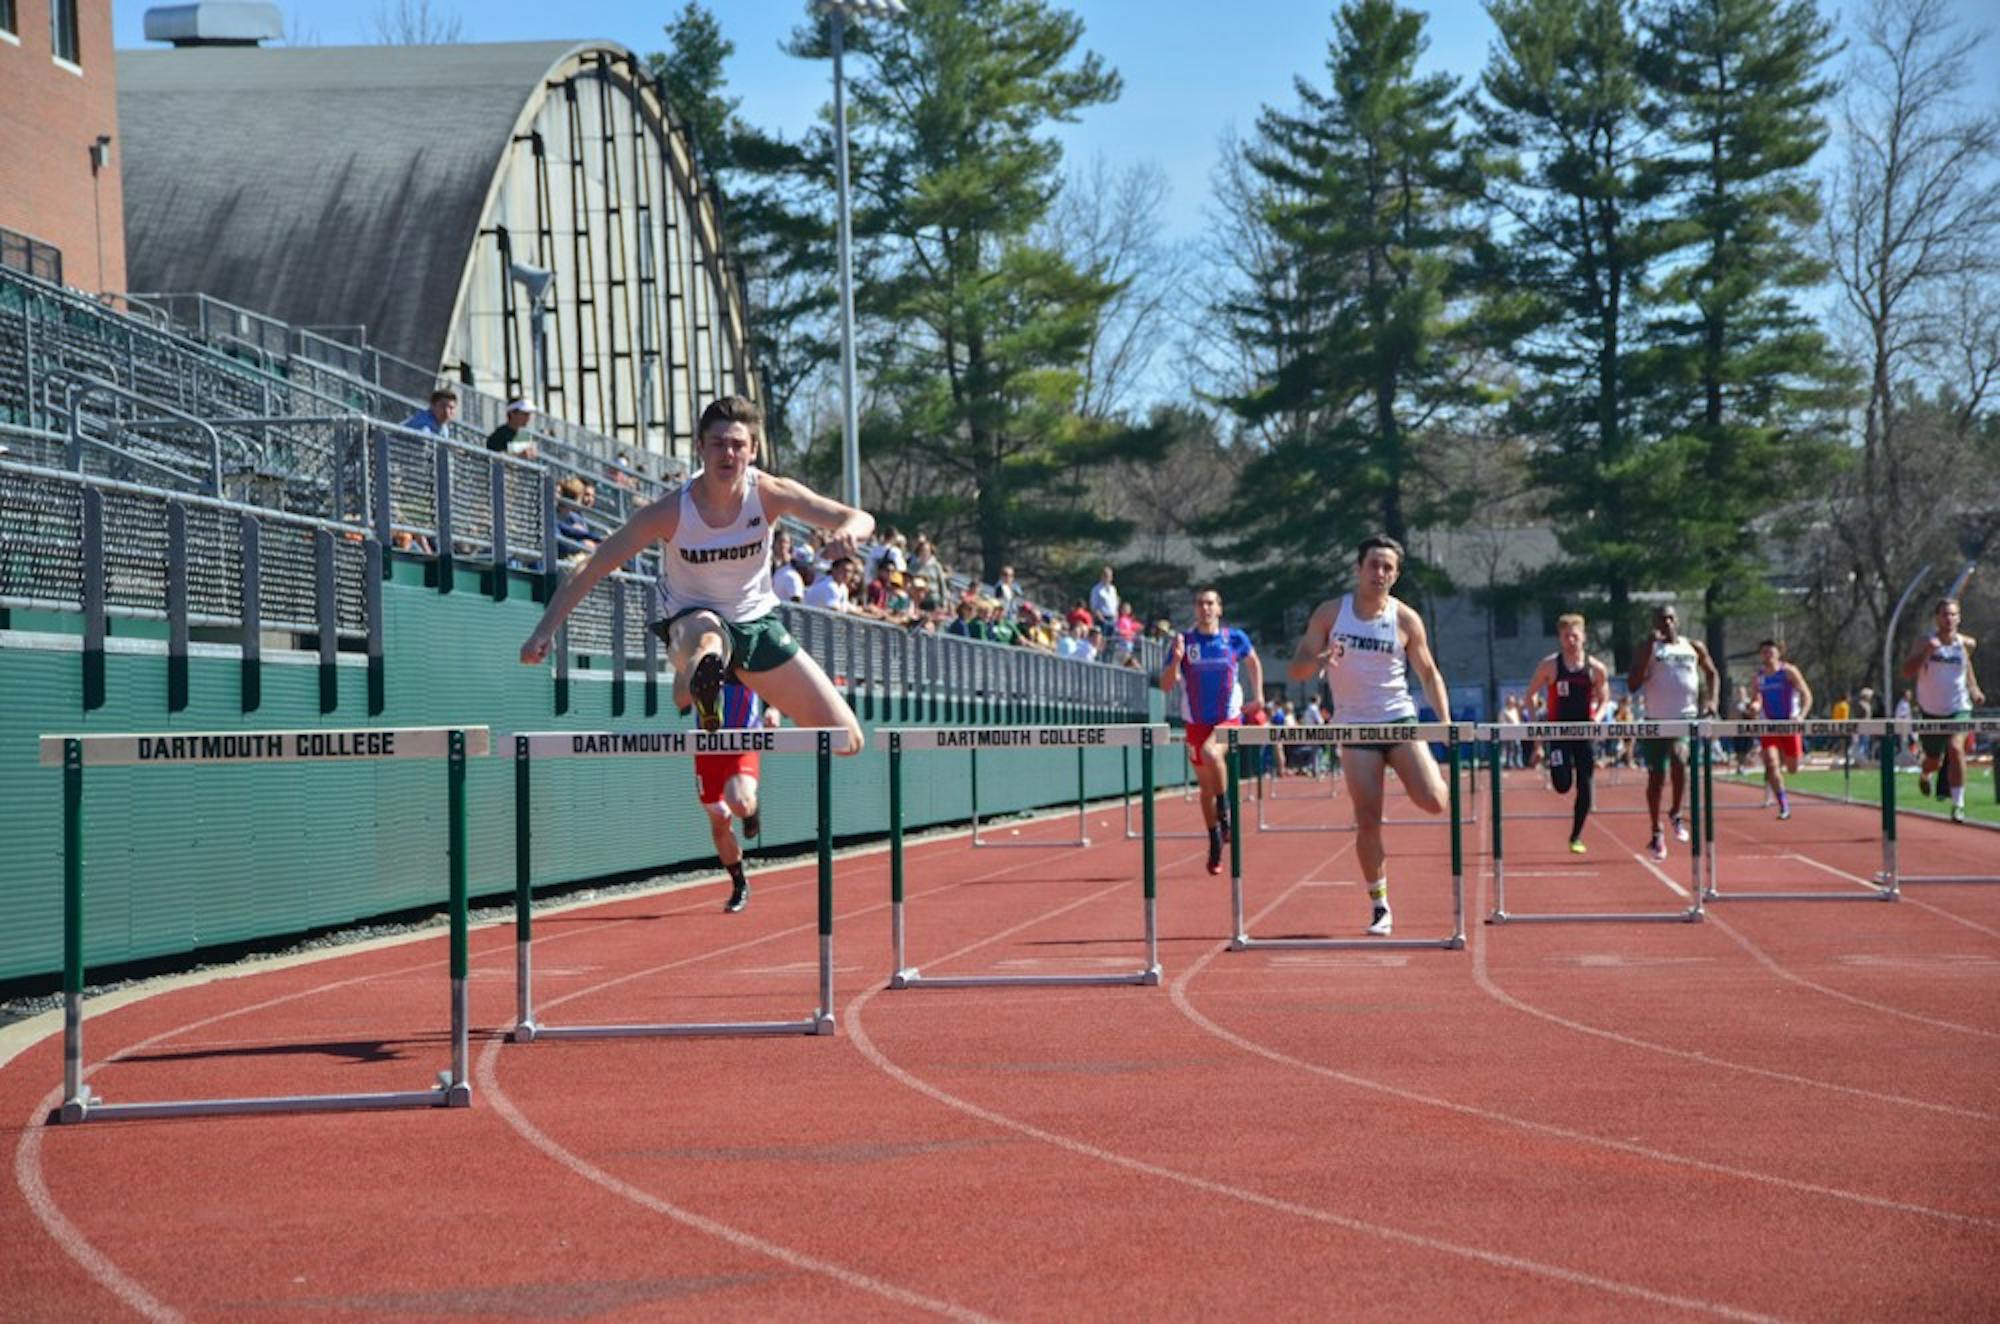 Both men's and women's track and field took first place this weekend.